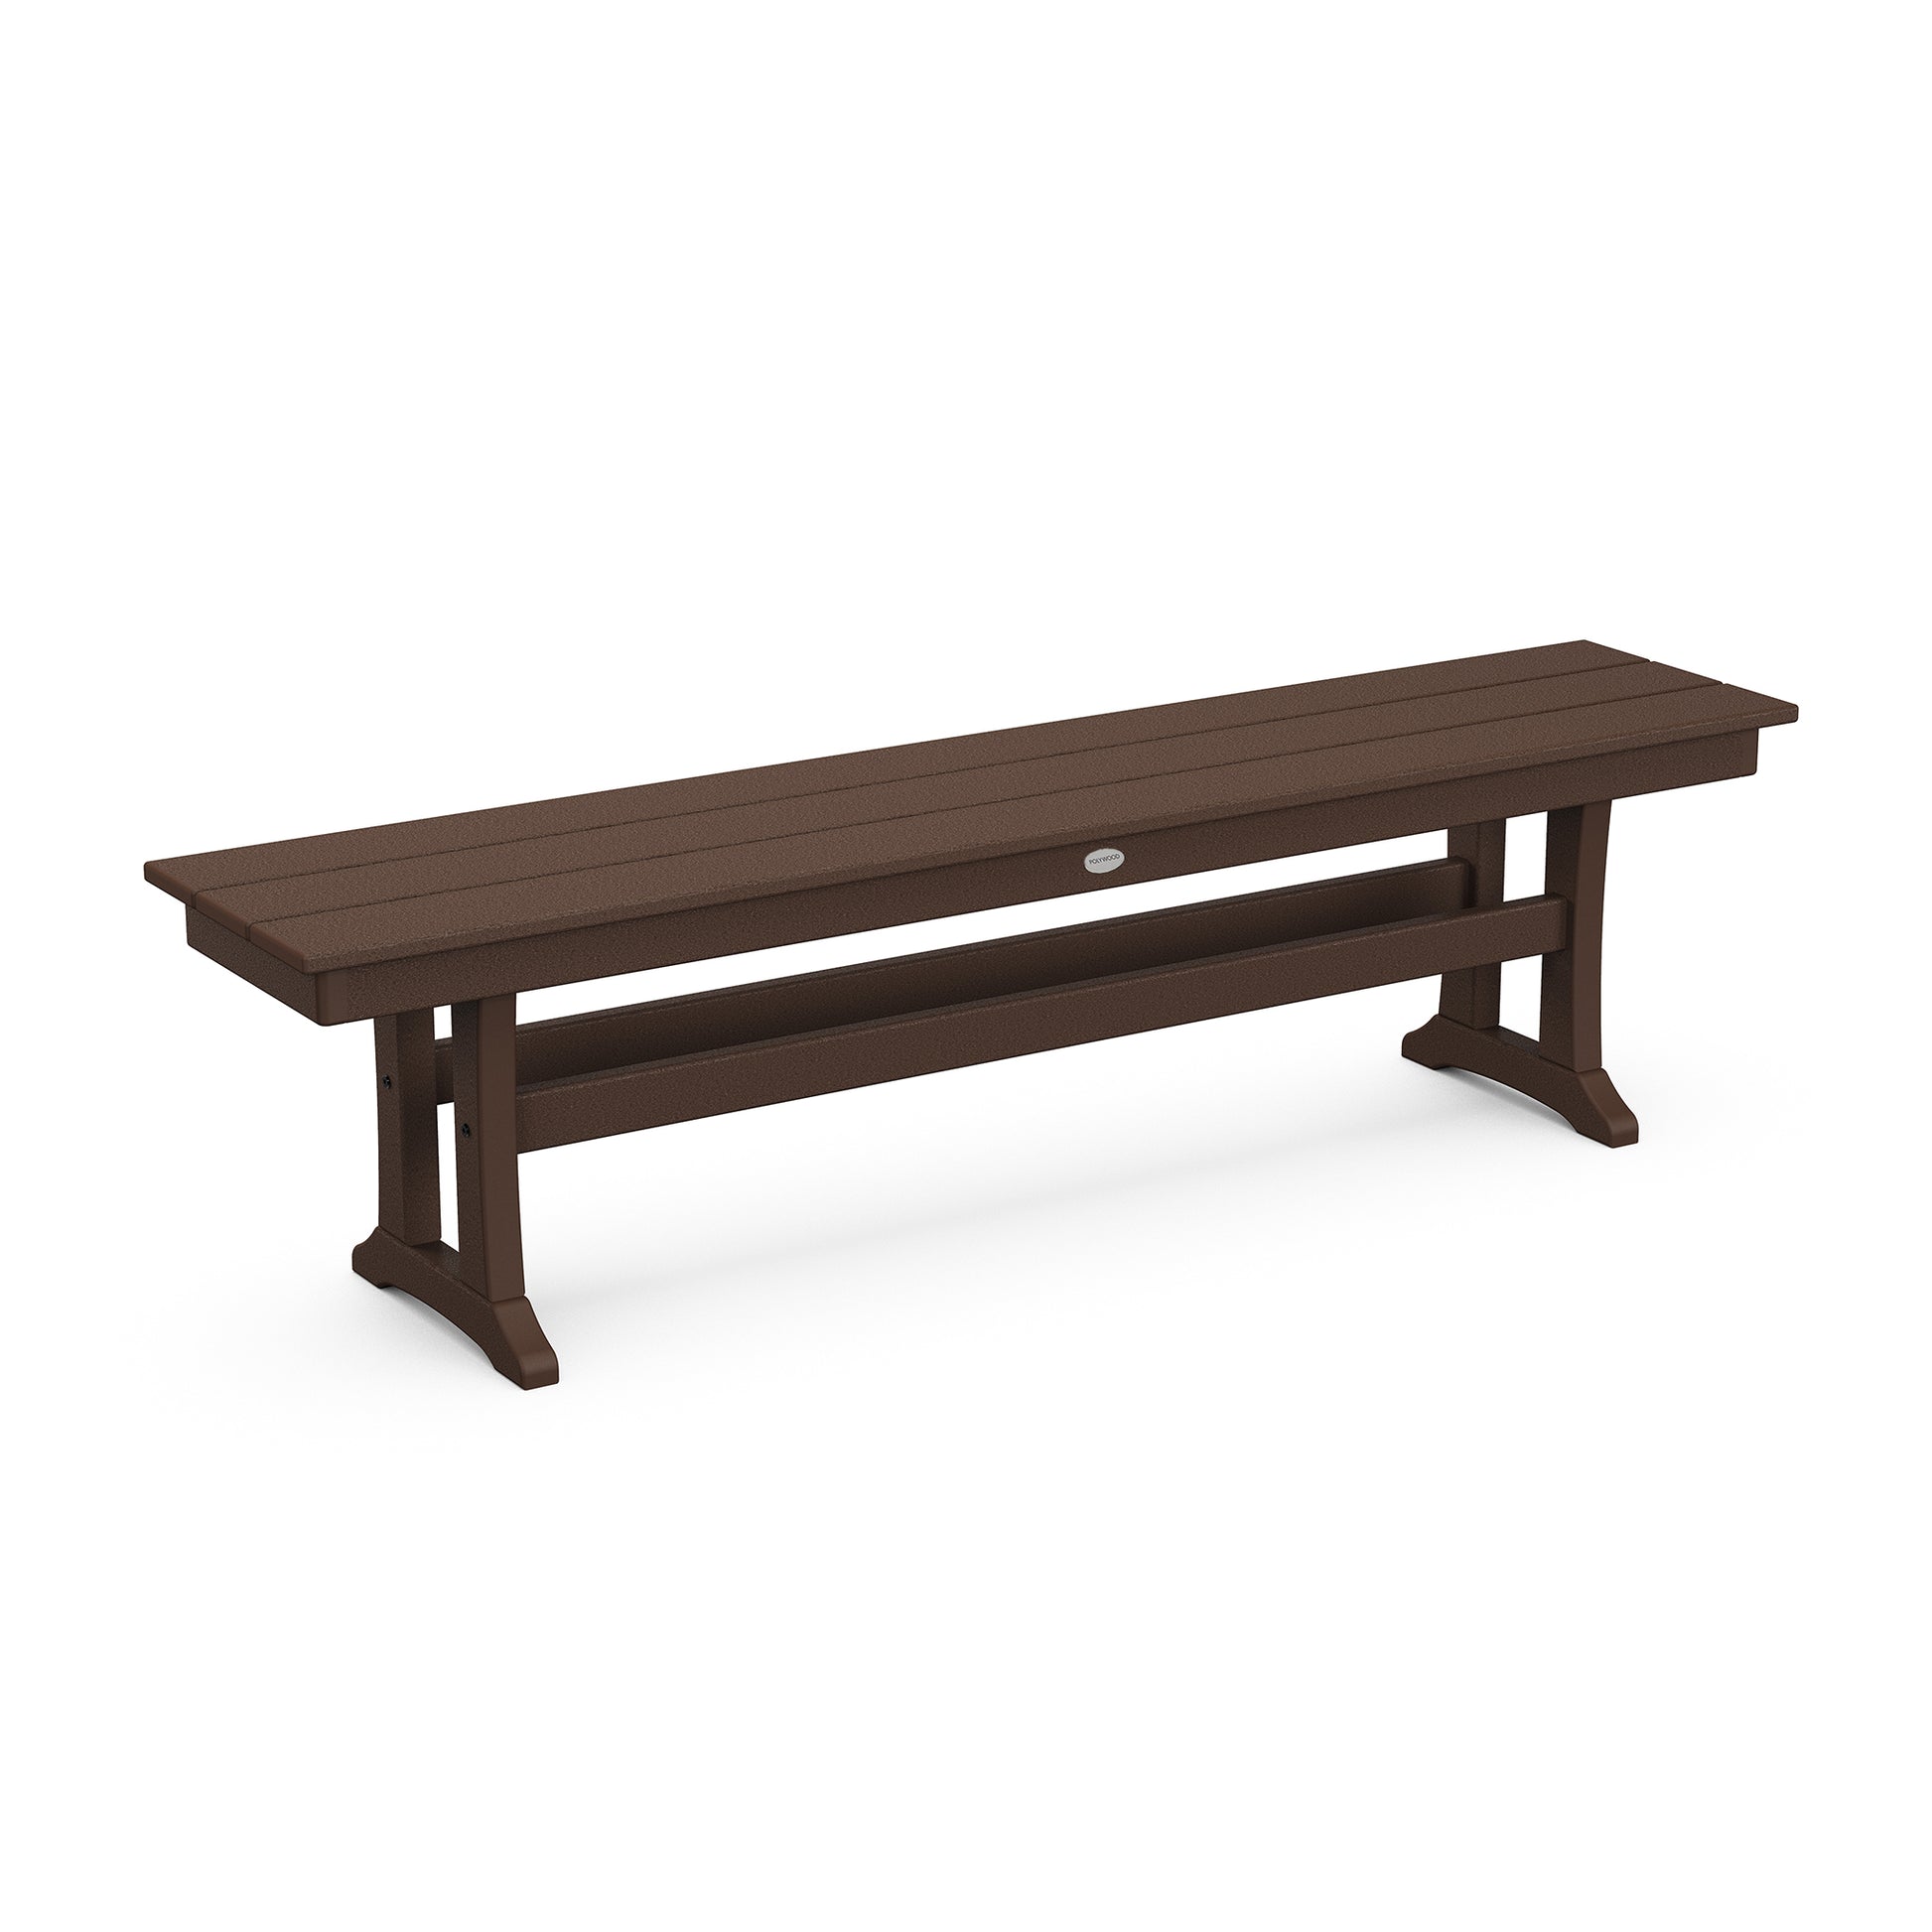 A brown POLYWOOD Farmhouse Trestle 65" bench with a simple, traditional design, featuring a flat seat supported by two sturdy legs connected by horizontal bars. The bench is isolated against a white background.